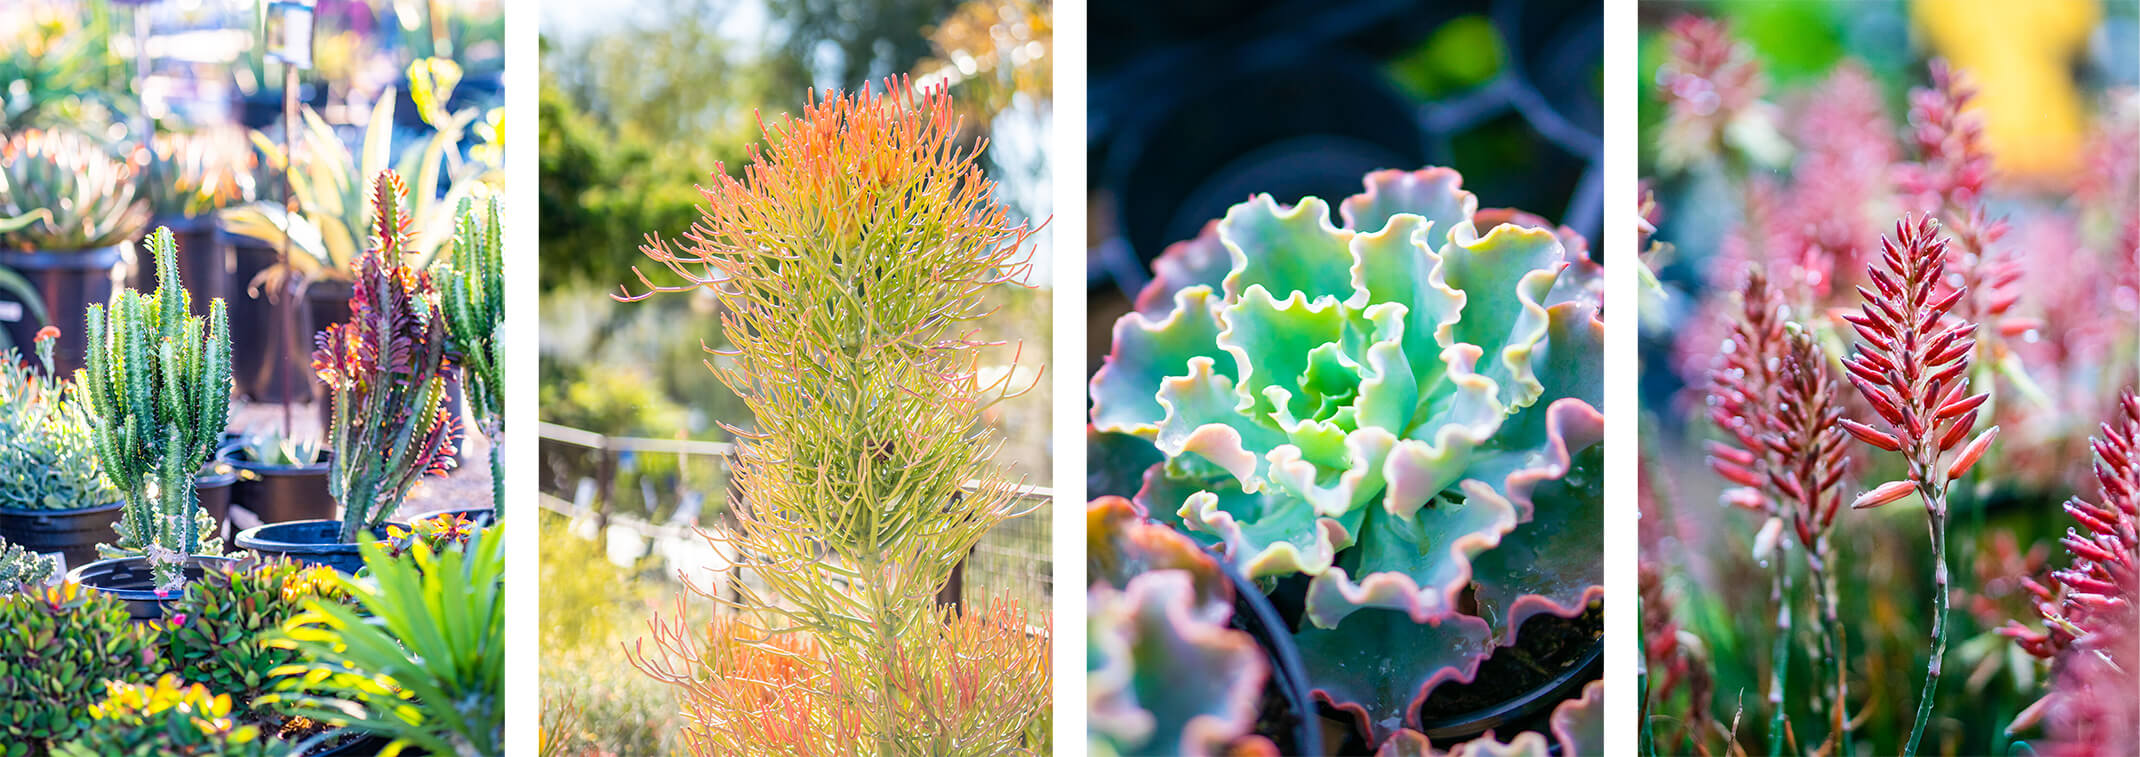 Winter-blooming aloes and a variety of colorful succulents